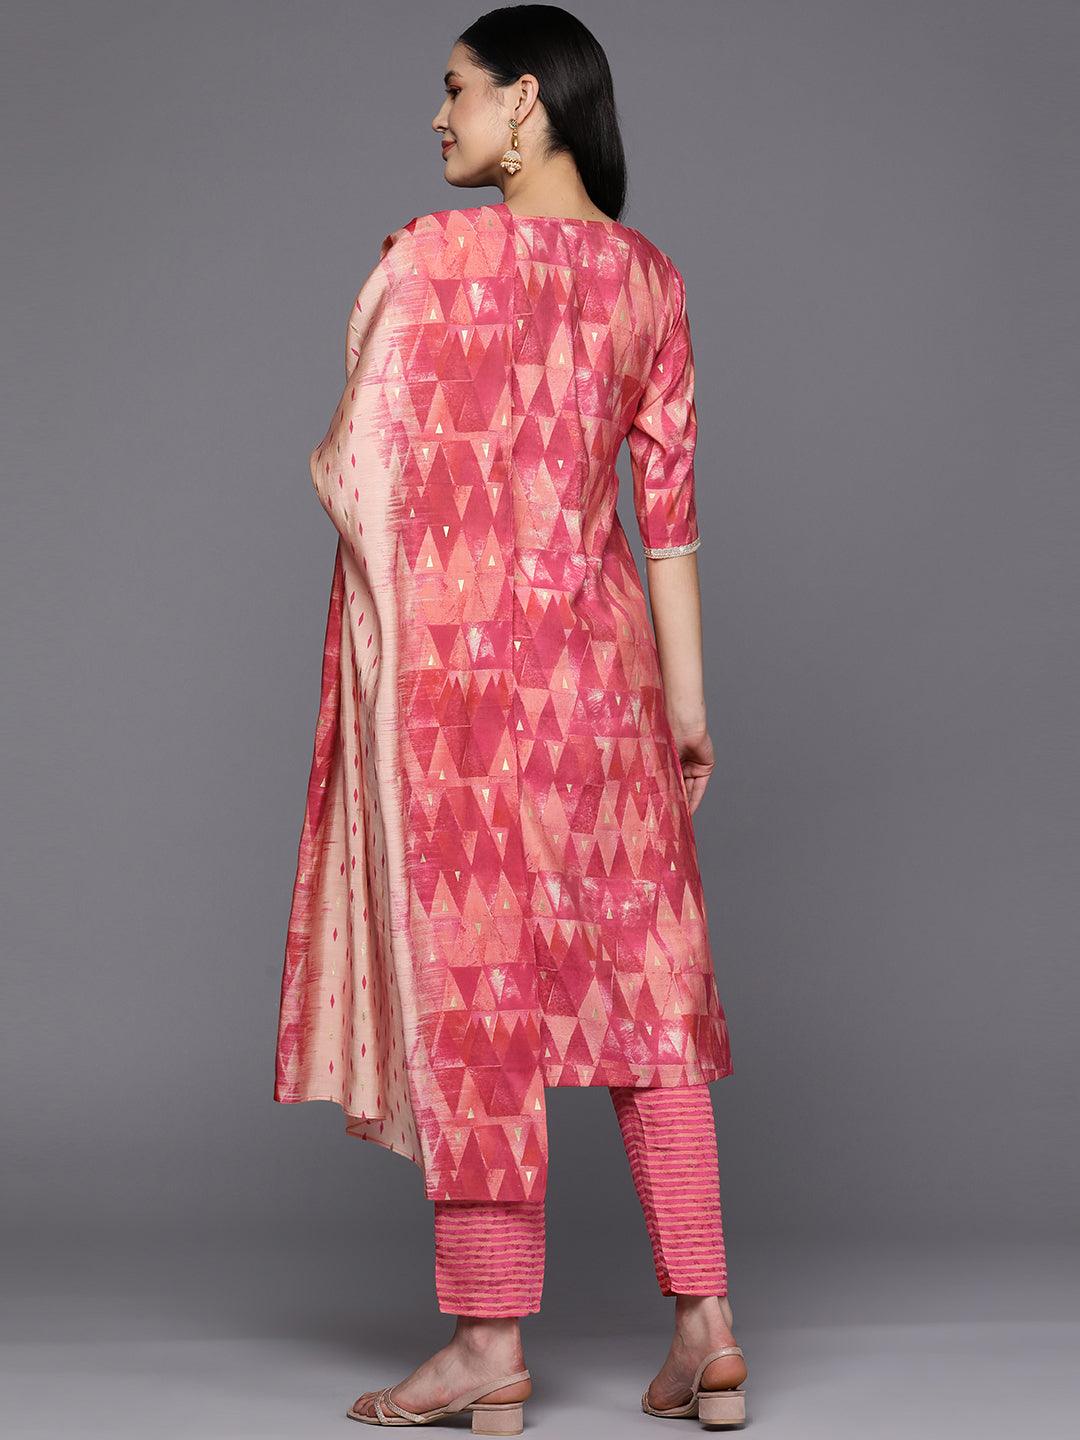 Coral Yoke Design Silk Blend Straight Suit Set With Trousers - Libas